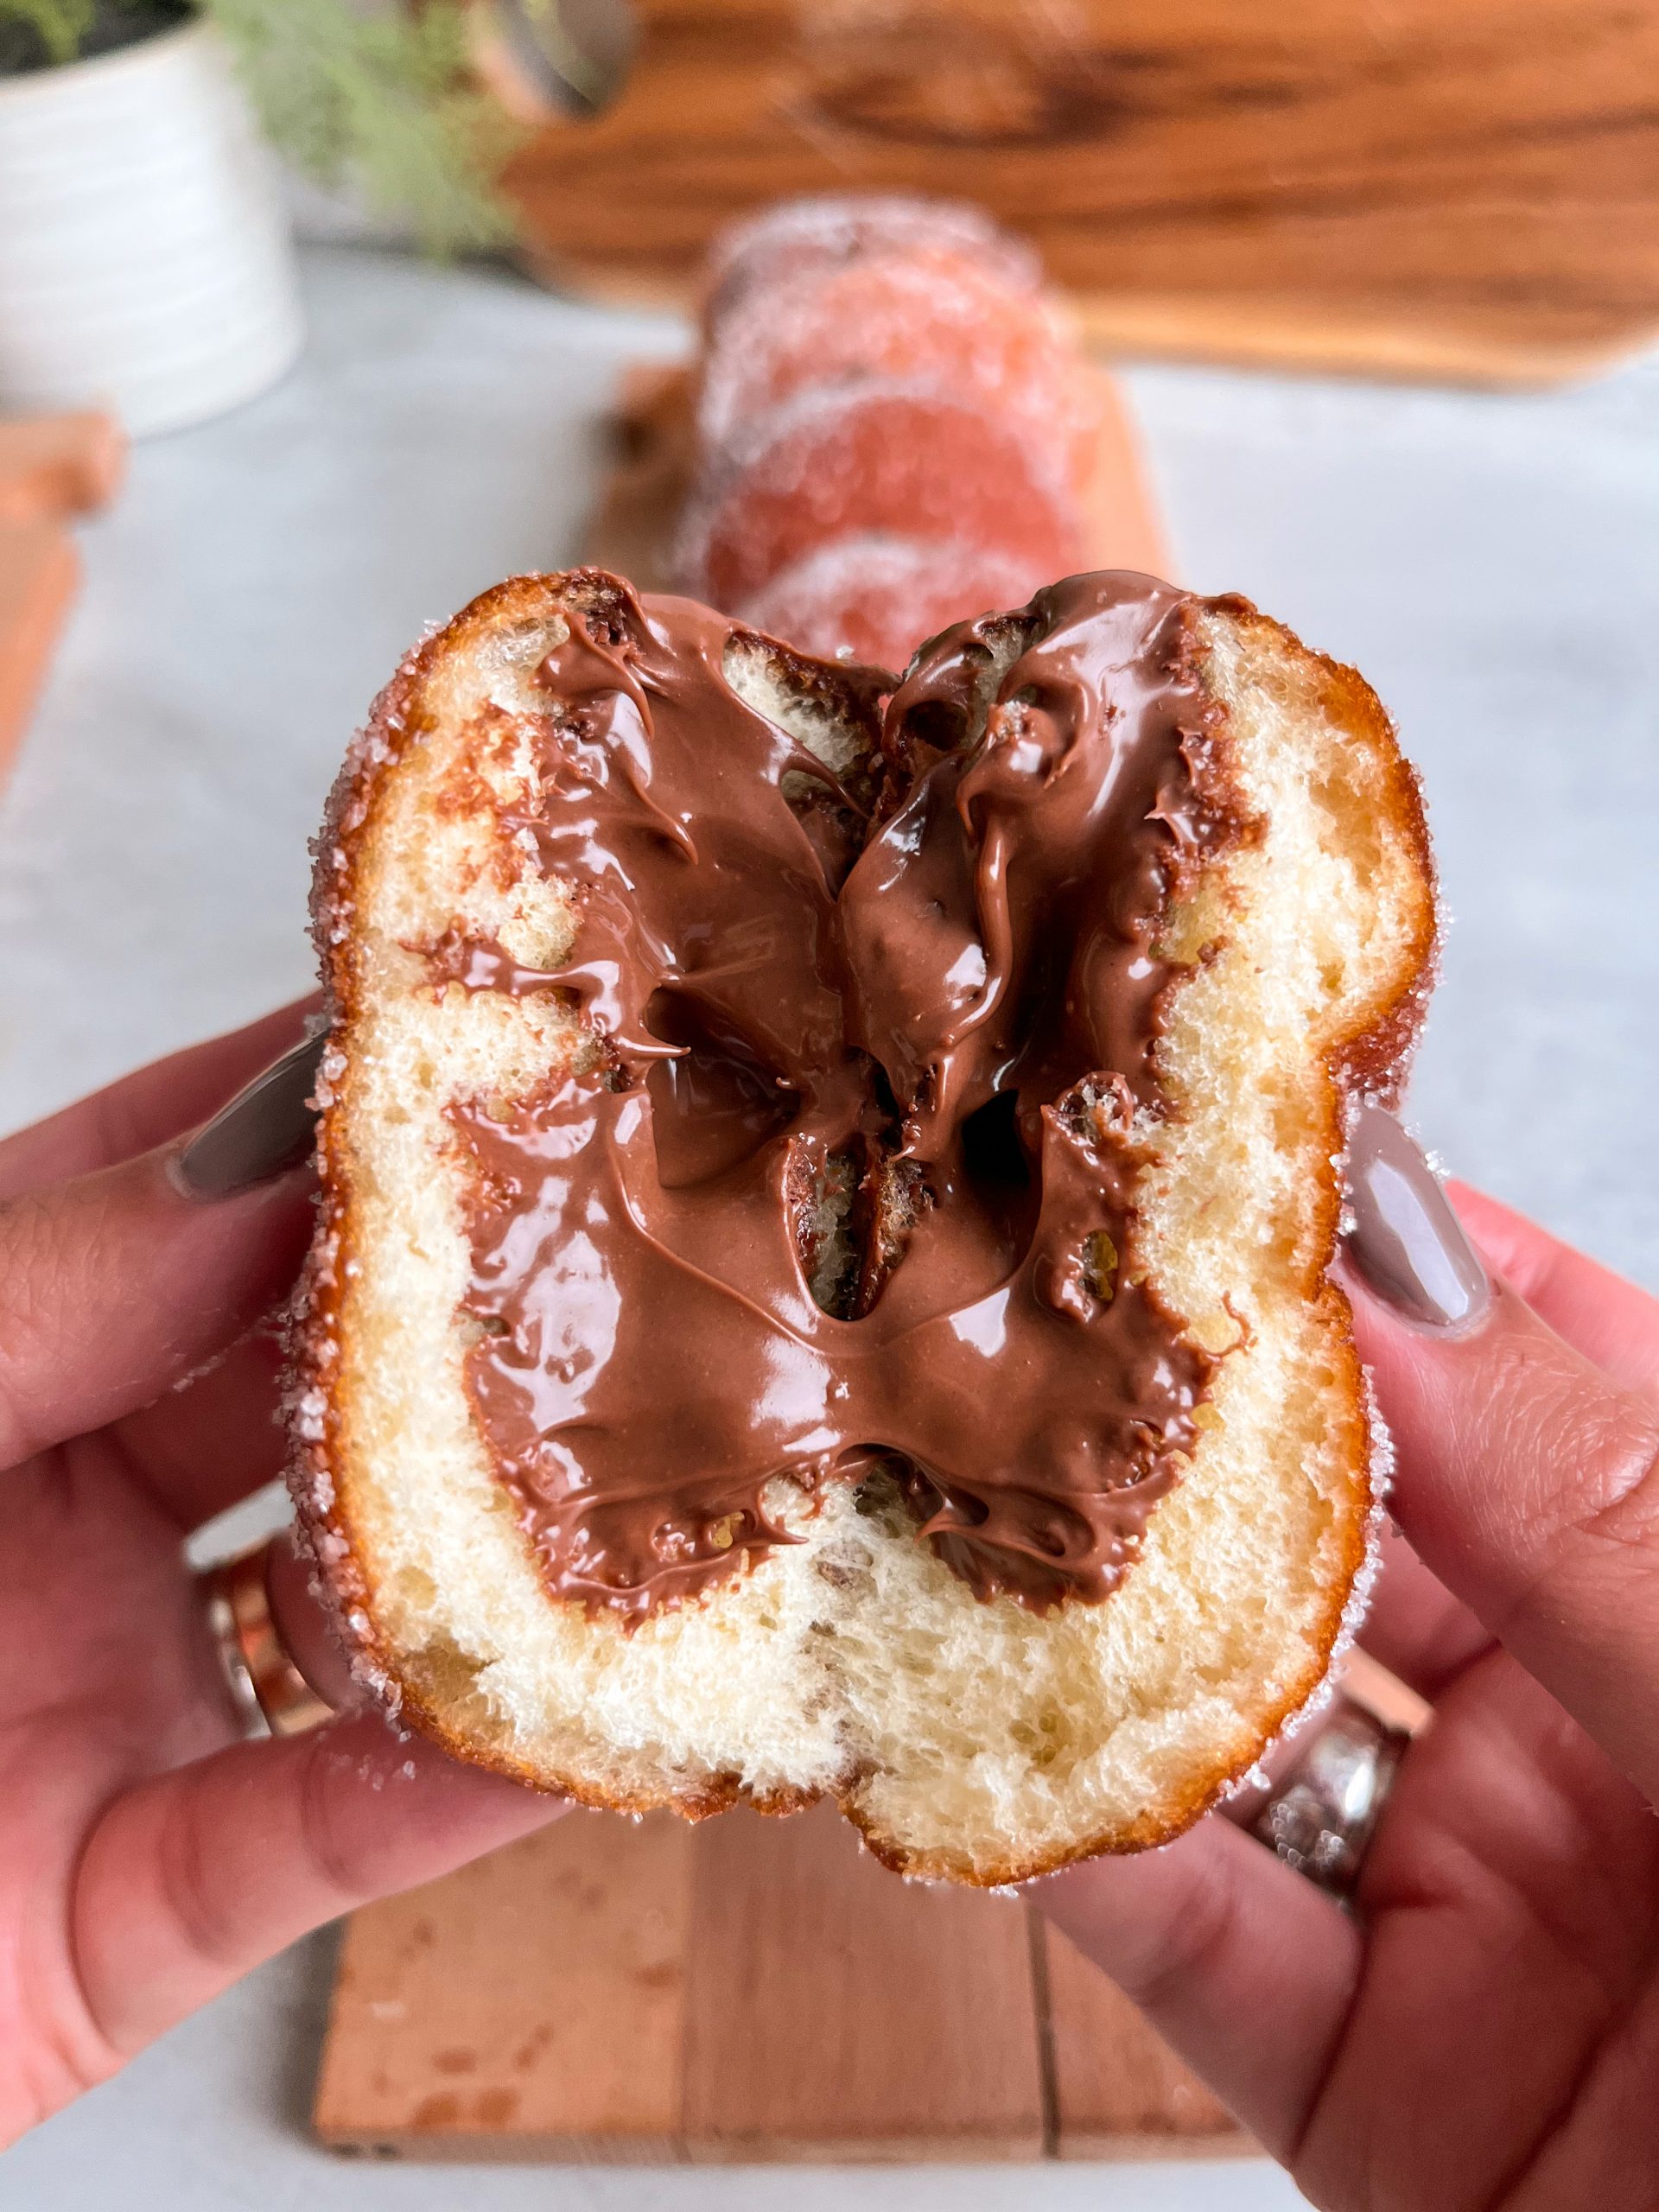 A halved donut held in two hands. Filled with nutella oozing out of the center. Donut has a soft, fine crumb.